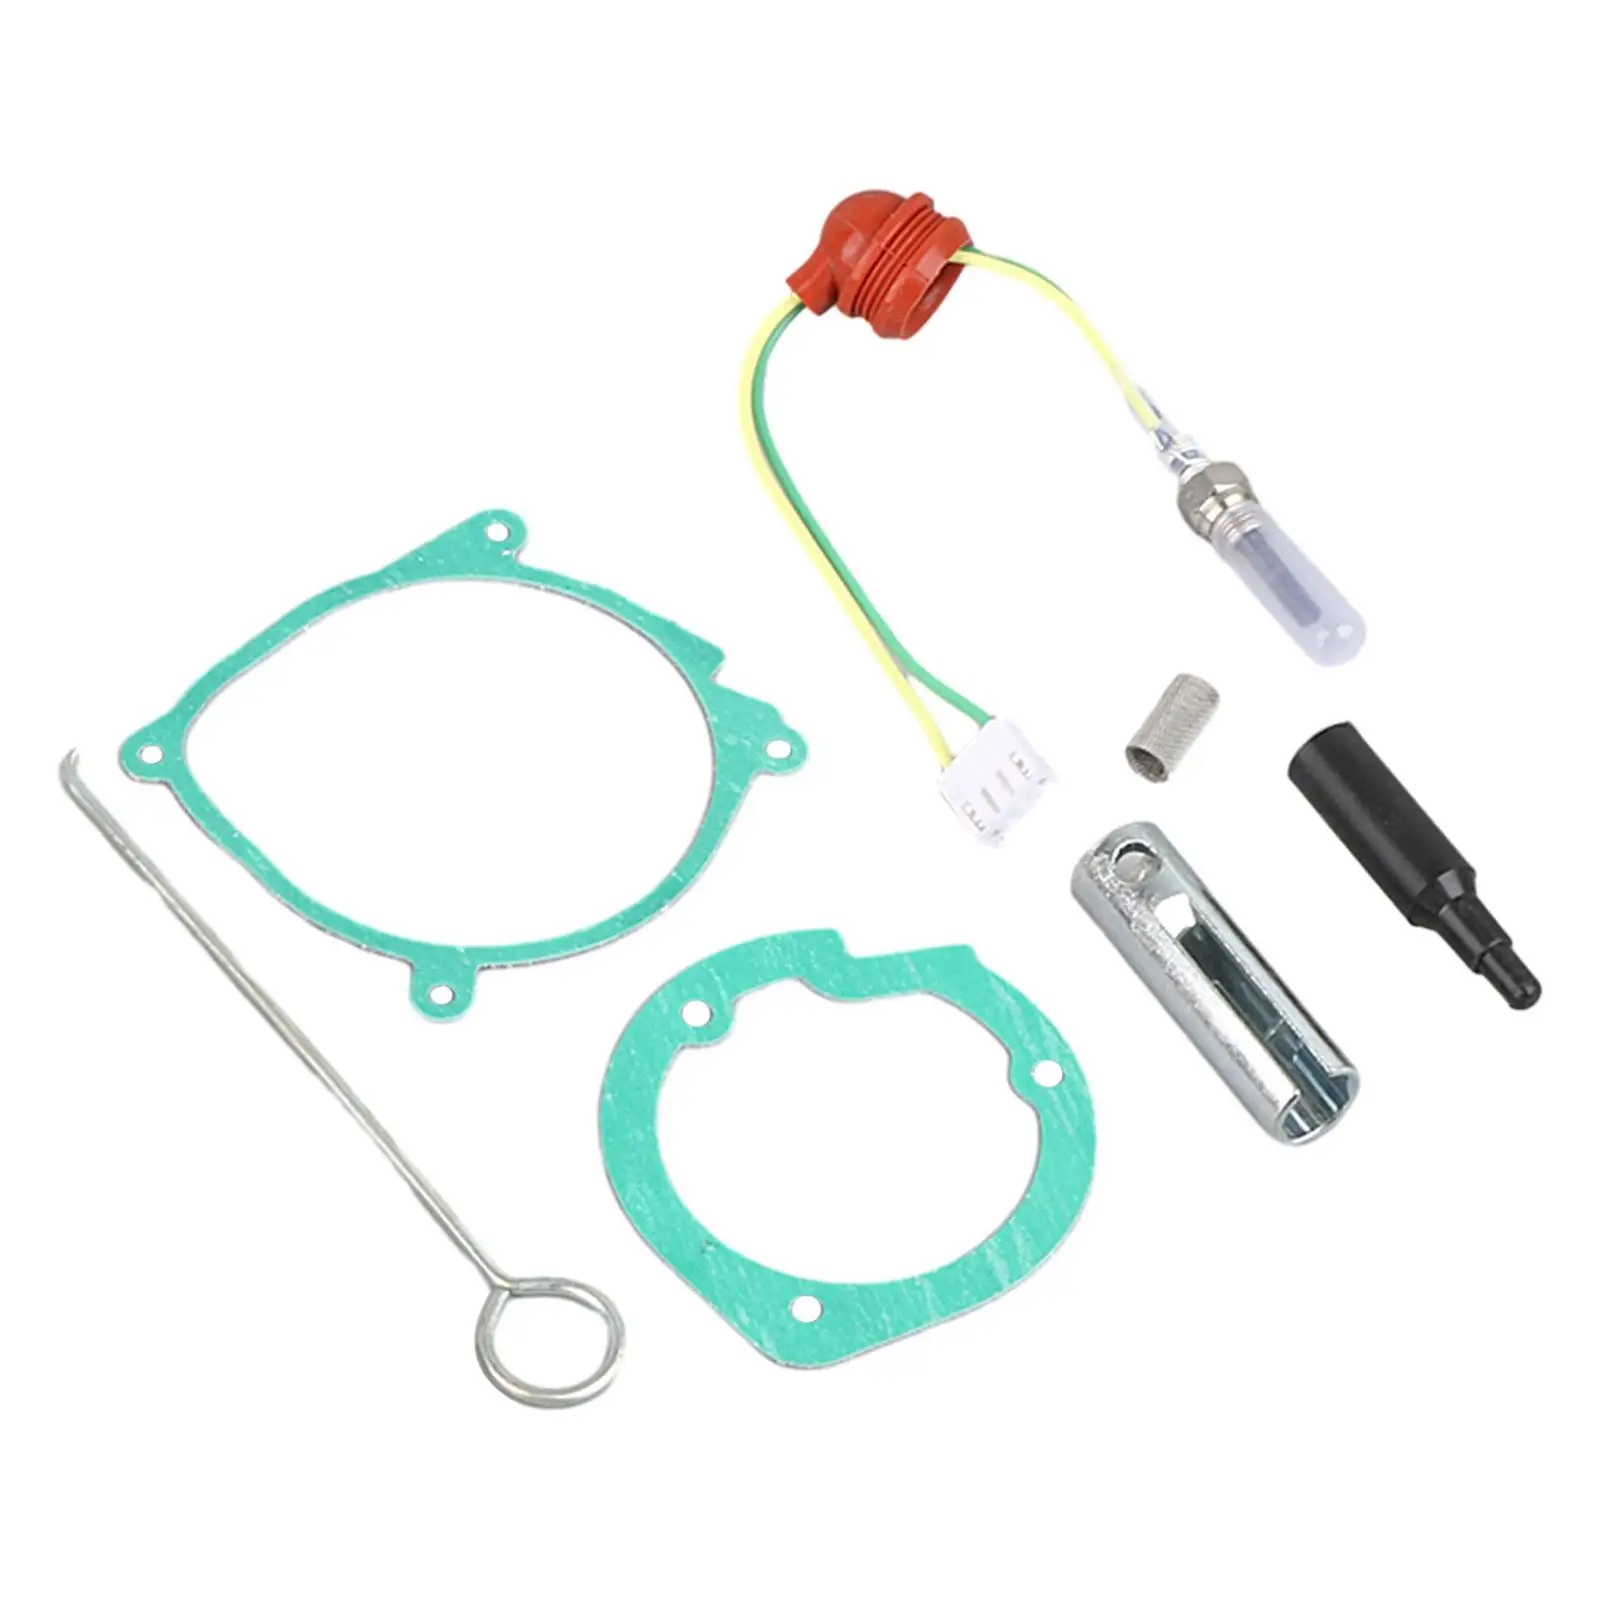 Glow Plug Repair Kit Parts Maintenance Supplies Net Vehicle Heating Ignition Plug Set for 12V 2kW Parking Heater Truck Boat